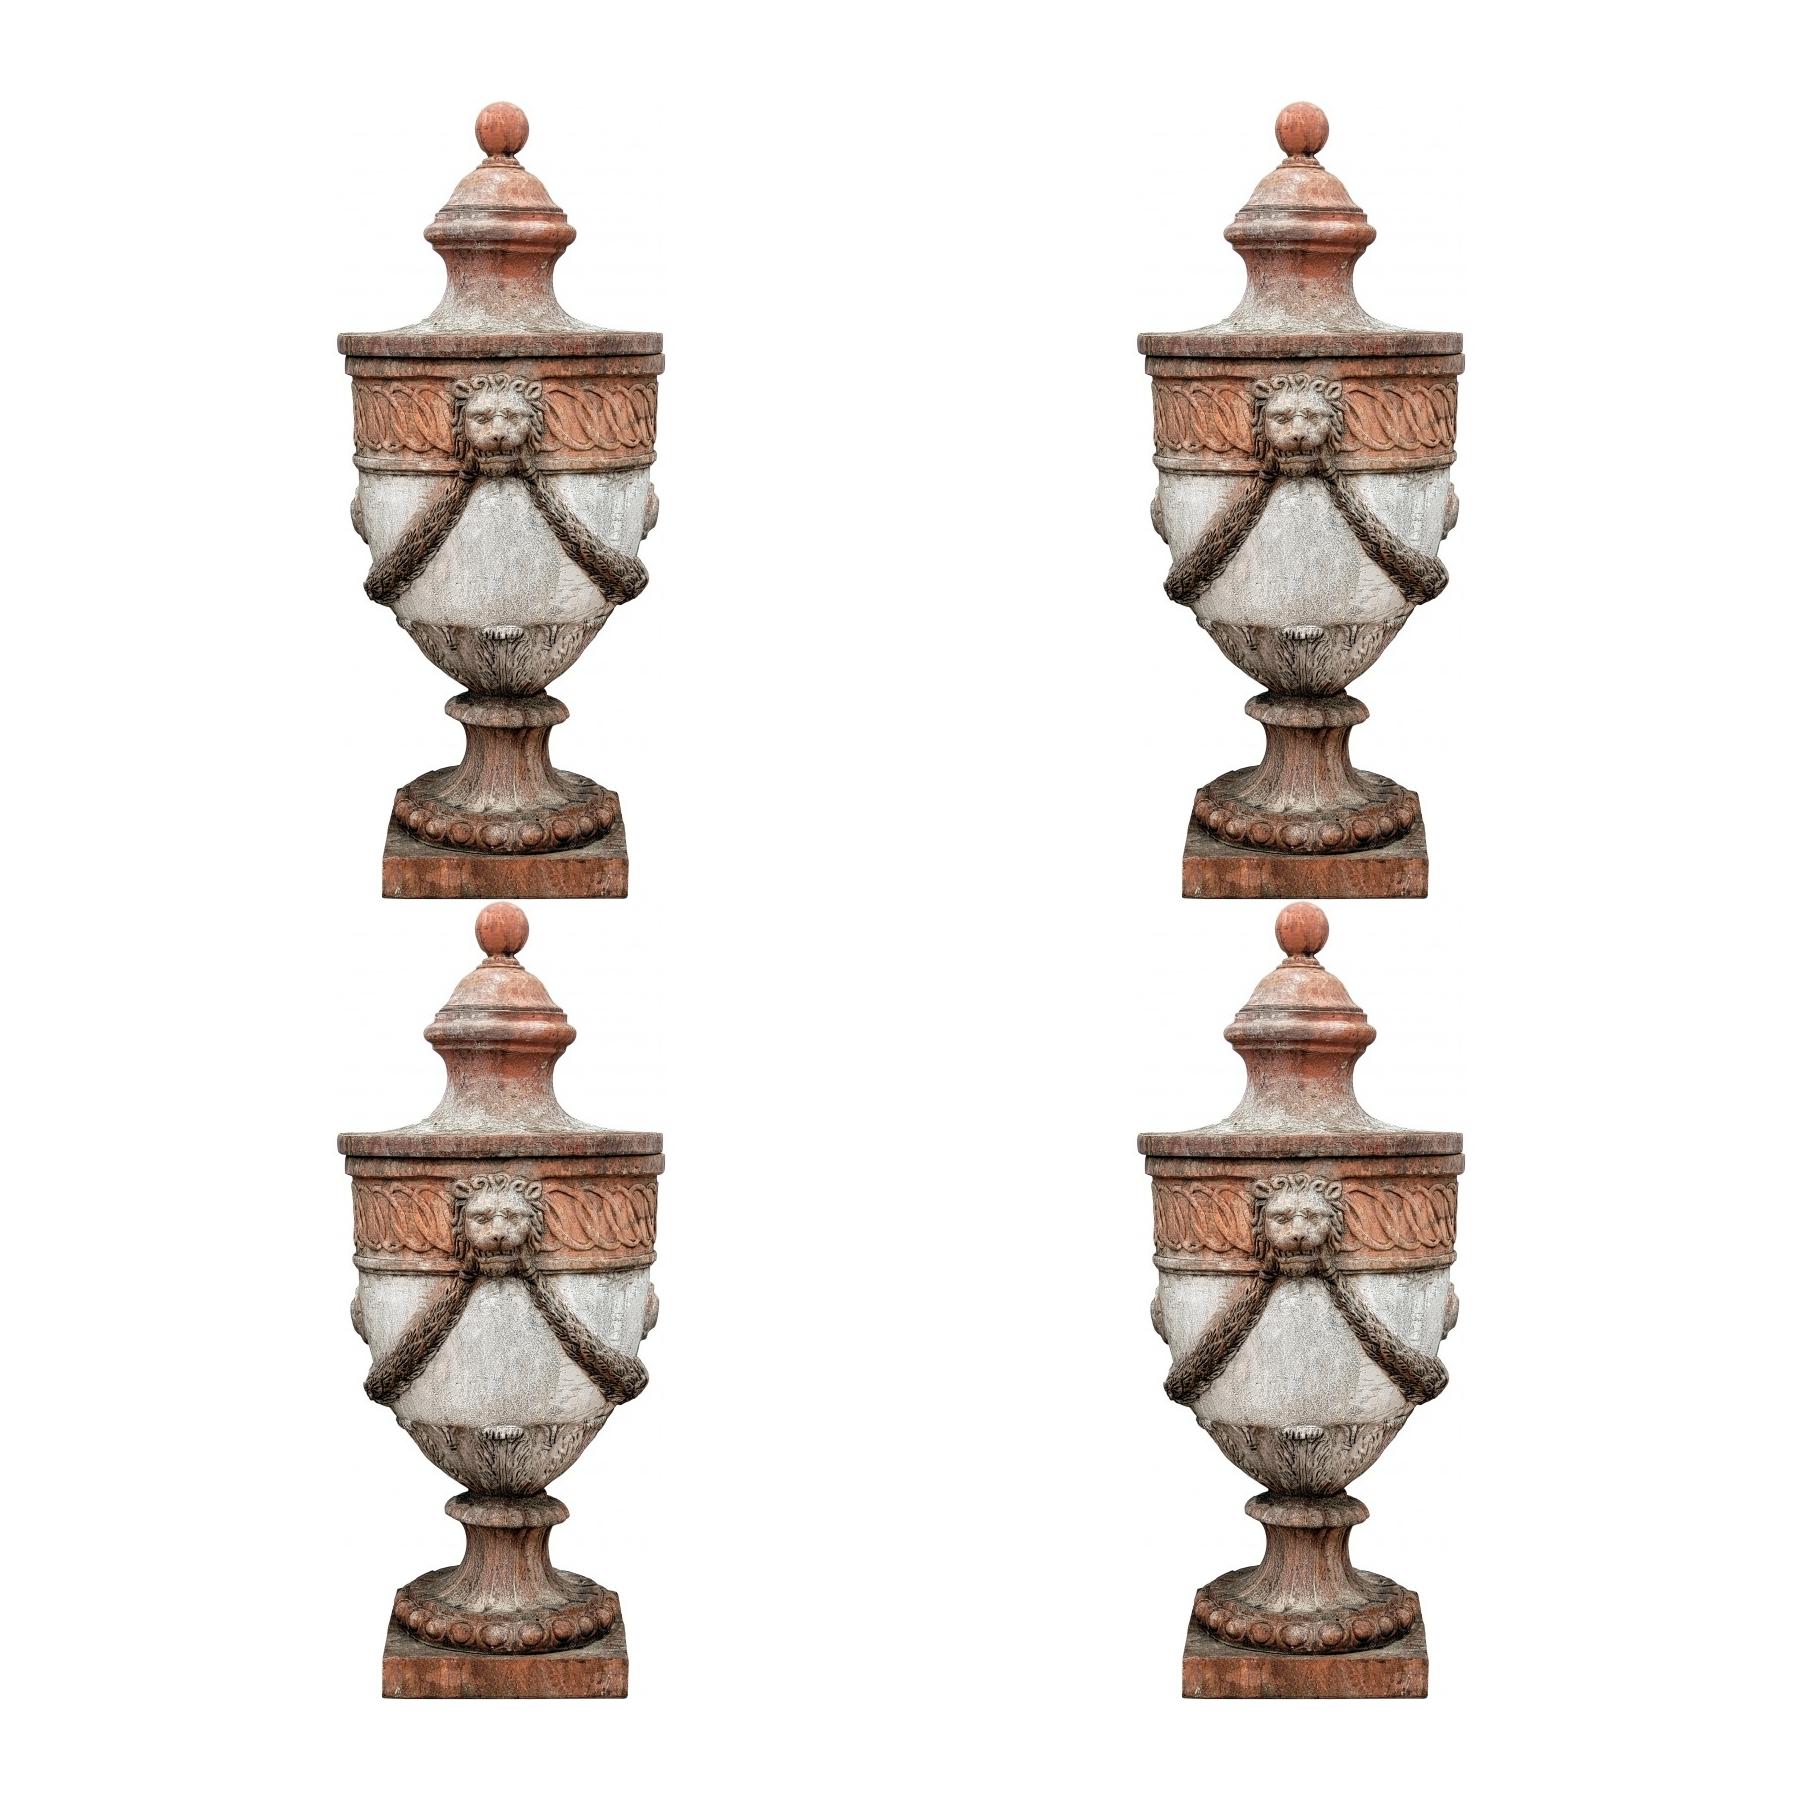 4 Vases Tuscan Empire, Impruneta terracotta florence, end 19th century.

Empire vase, common on the roof of the ancient Florentine villas remodeled in the 19th century..
The cap, imposing, with considerable momentum, is surmounted by a sphere.